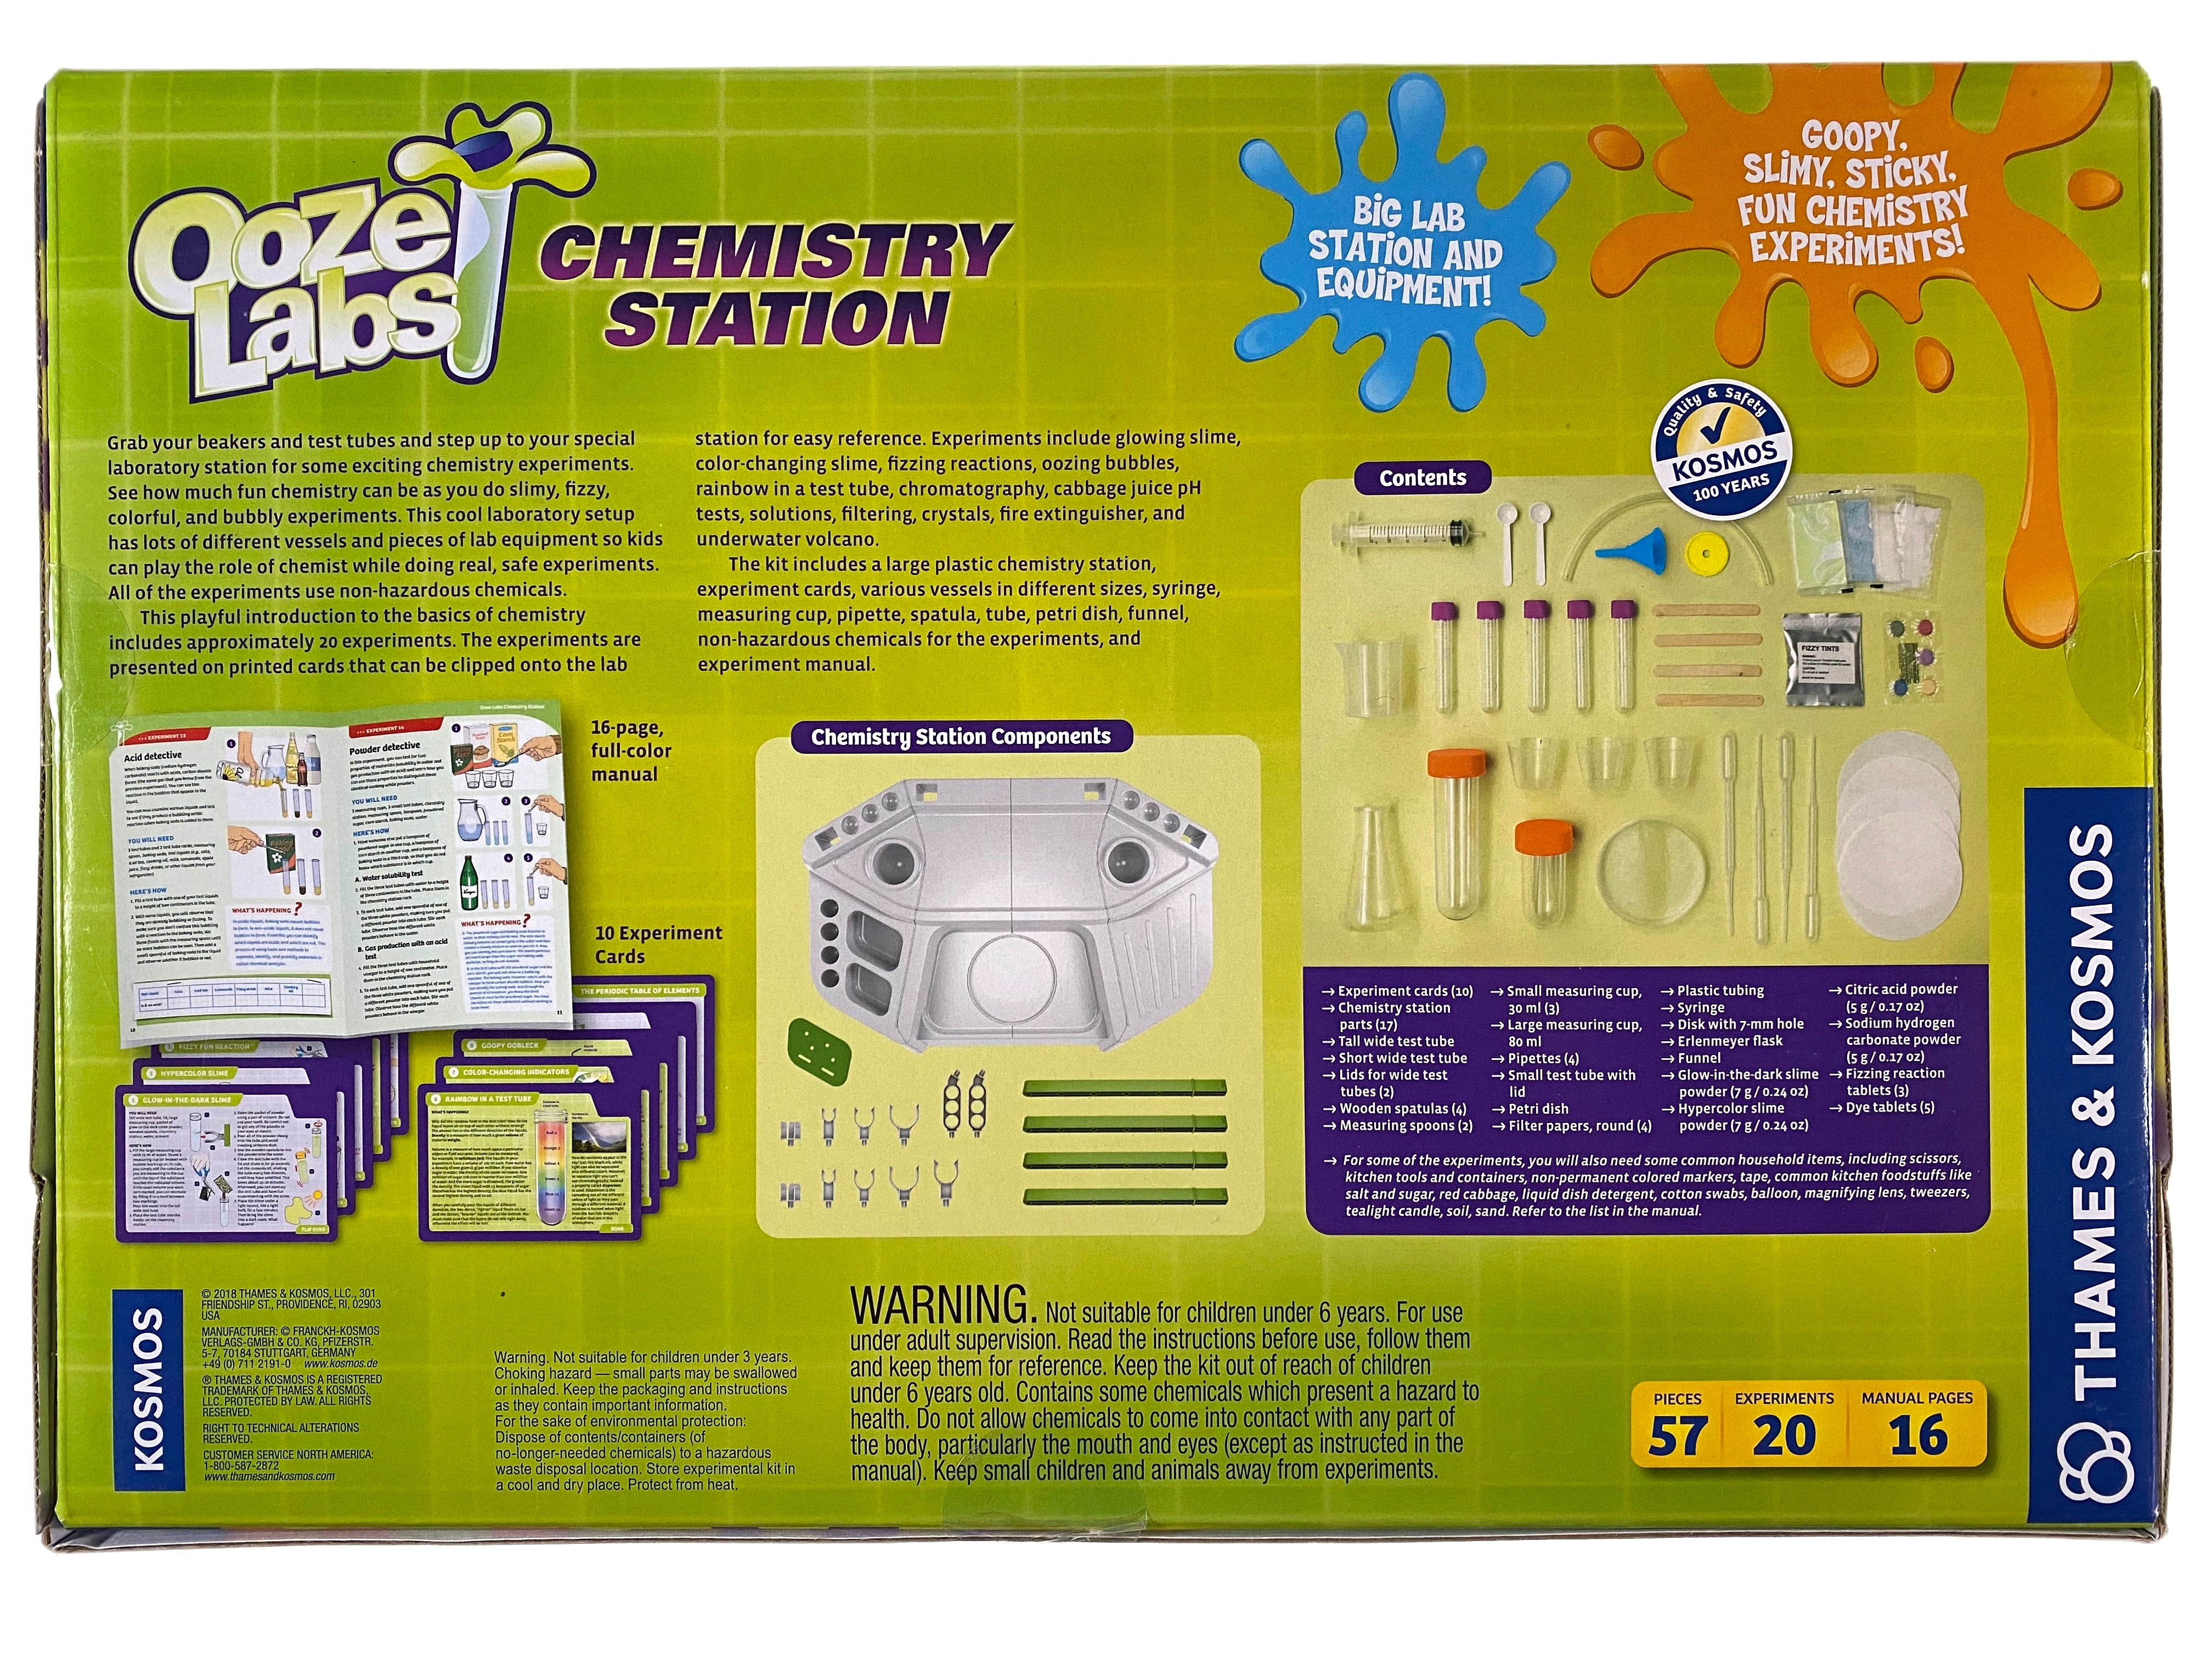 Ooze Labs Chemistry Station    